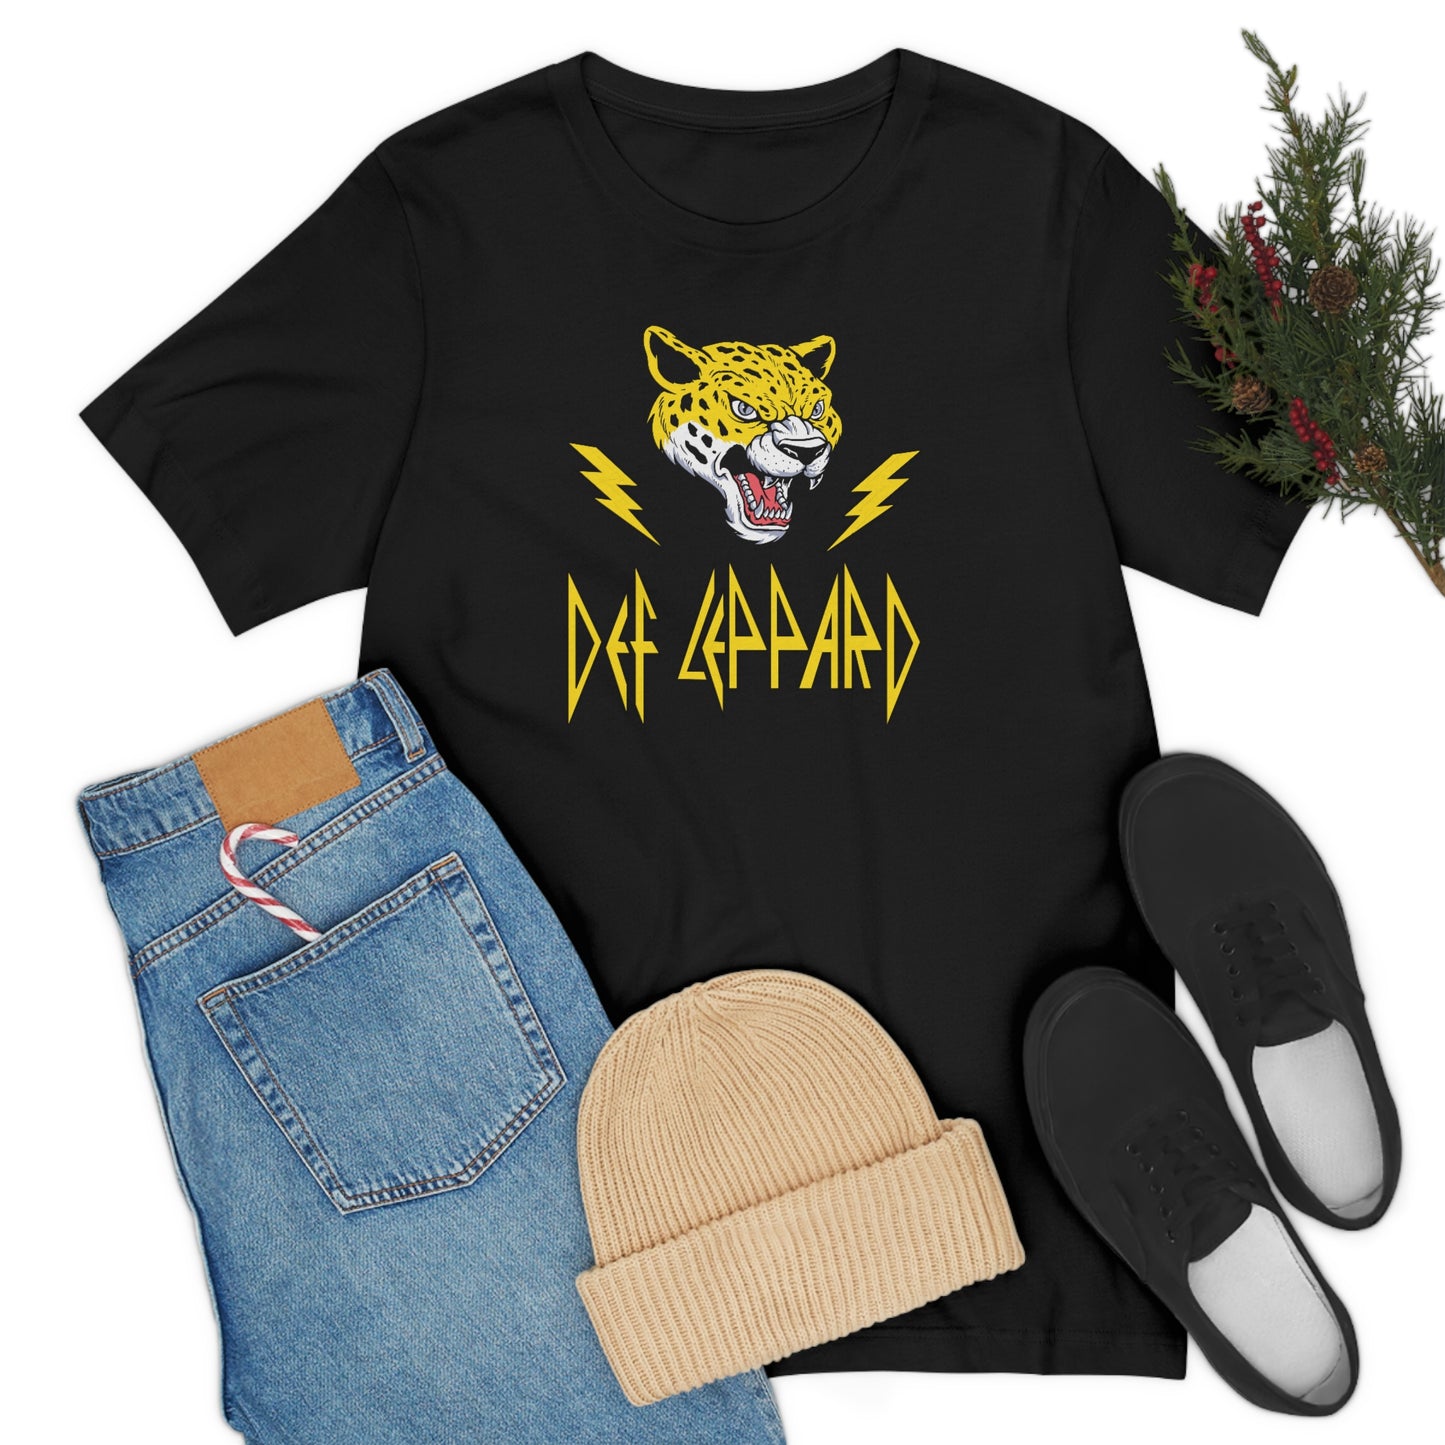 Def Leppard Shirt Gift For Fans,High 'N' Dry Album Shirt For Def Leppard Fans,Gift For Music Lover,Rock Band Shirt,Vintage Def Leppard Shirt